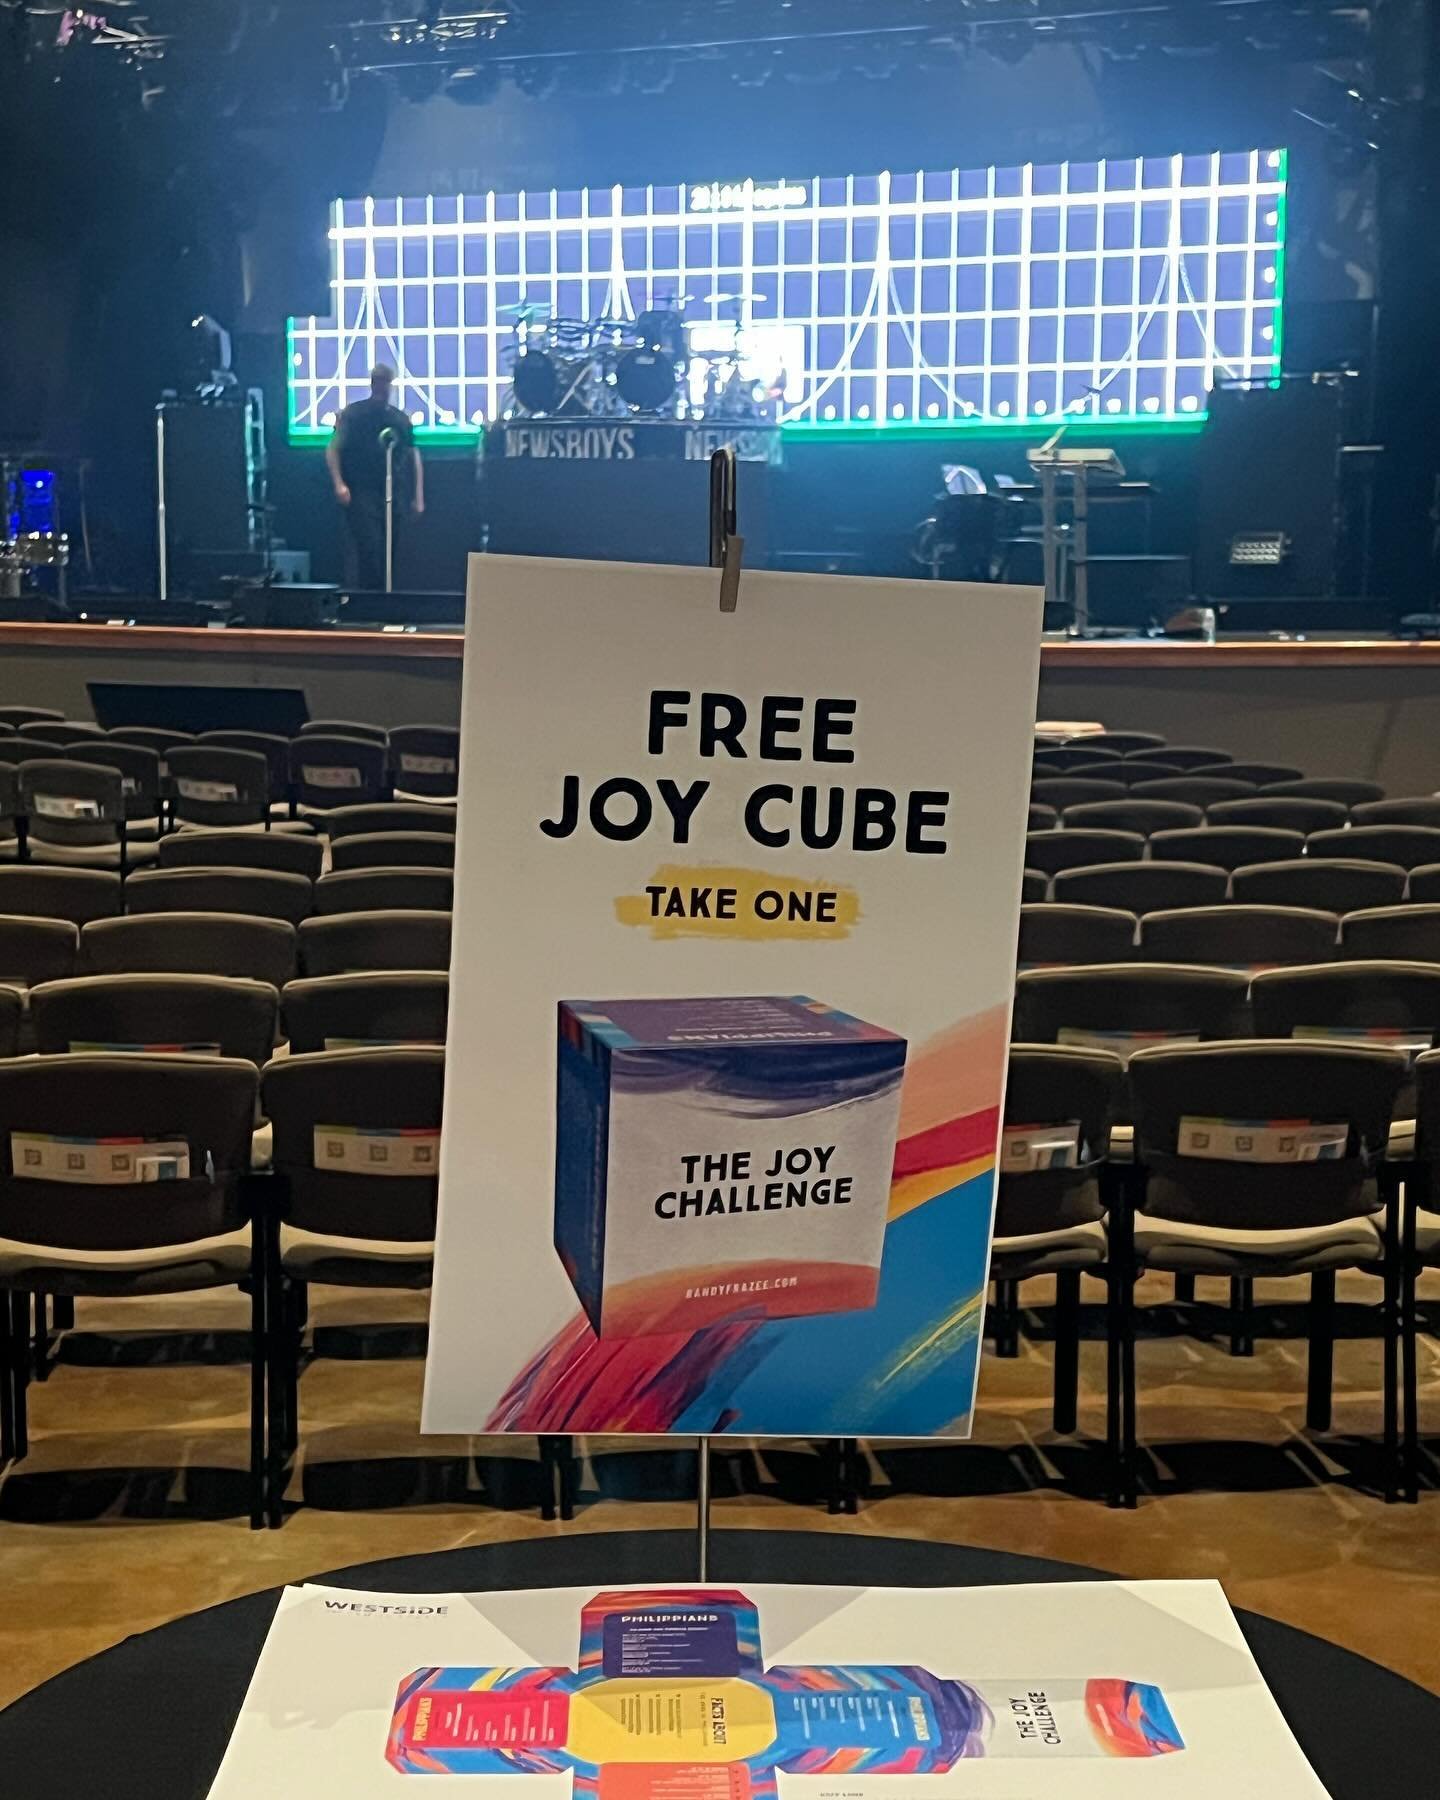 A free Joy Cube &amp; The Newsboys tomorrow &amp; a whole lot of Jesus. Setting it all up now. Can&rsquo;t wait to see everyone - 8:15, 9:30, 11:00 @ Westside Family Church. Let the JOY begin!